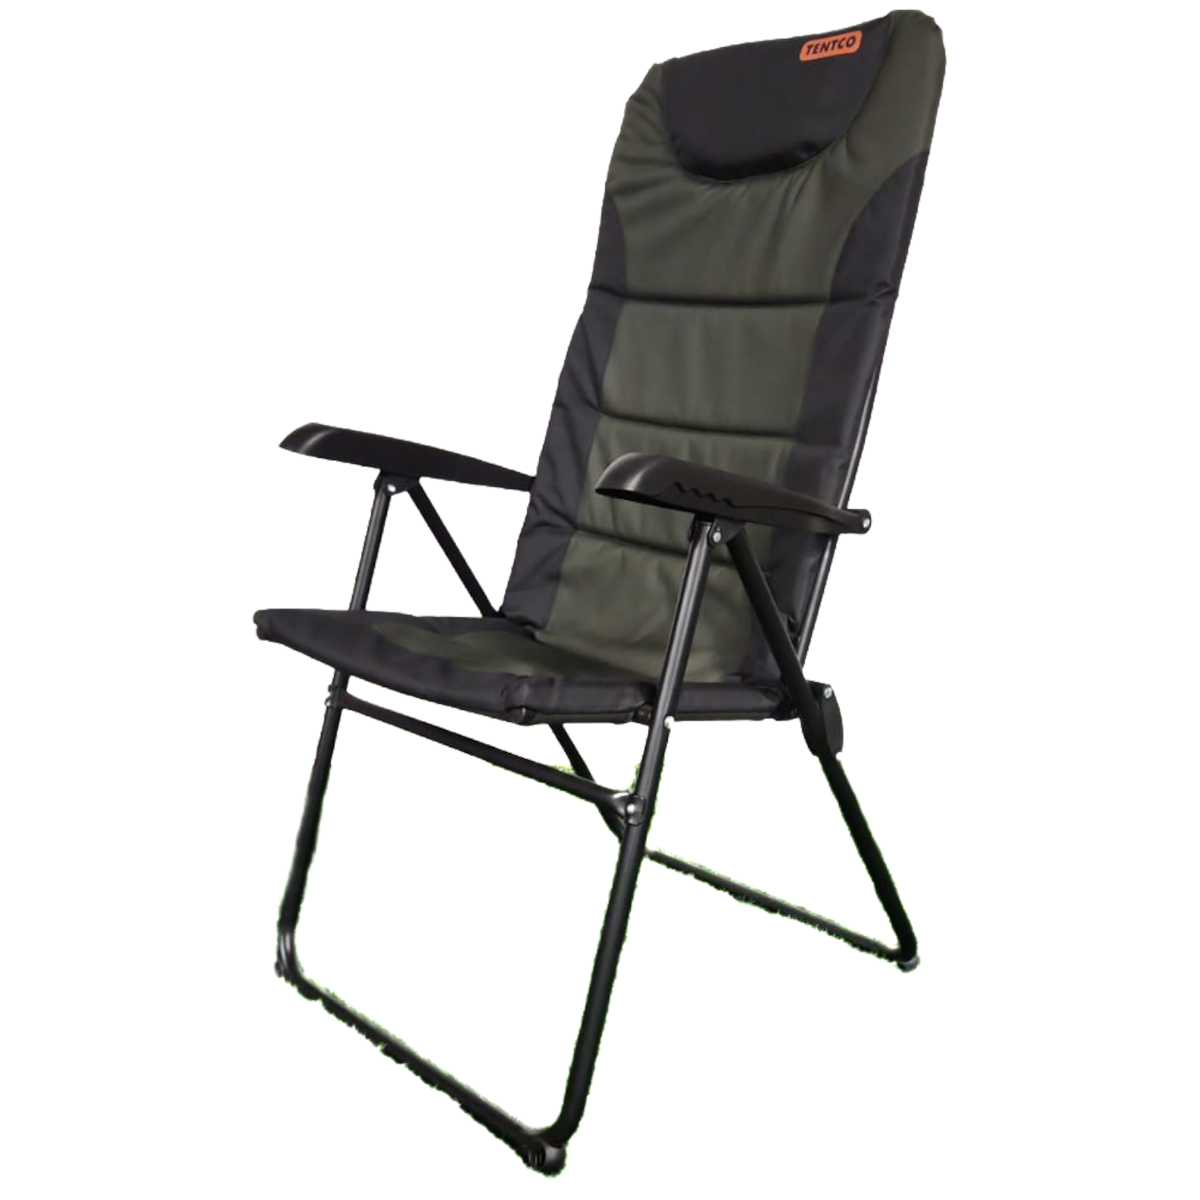 Tentco Classic Chair | Camp And Climb